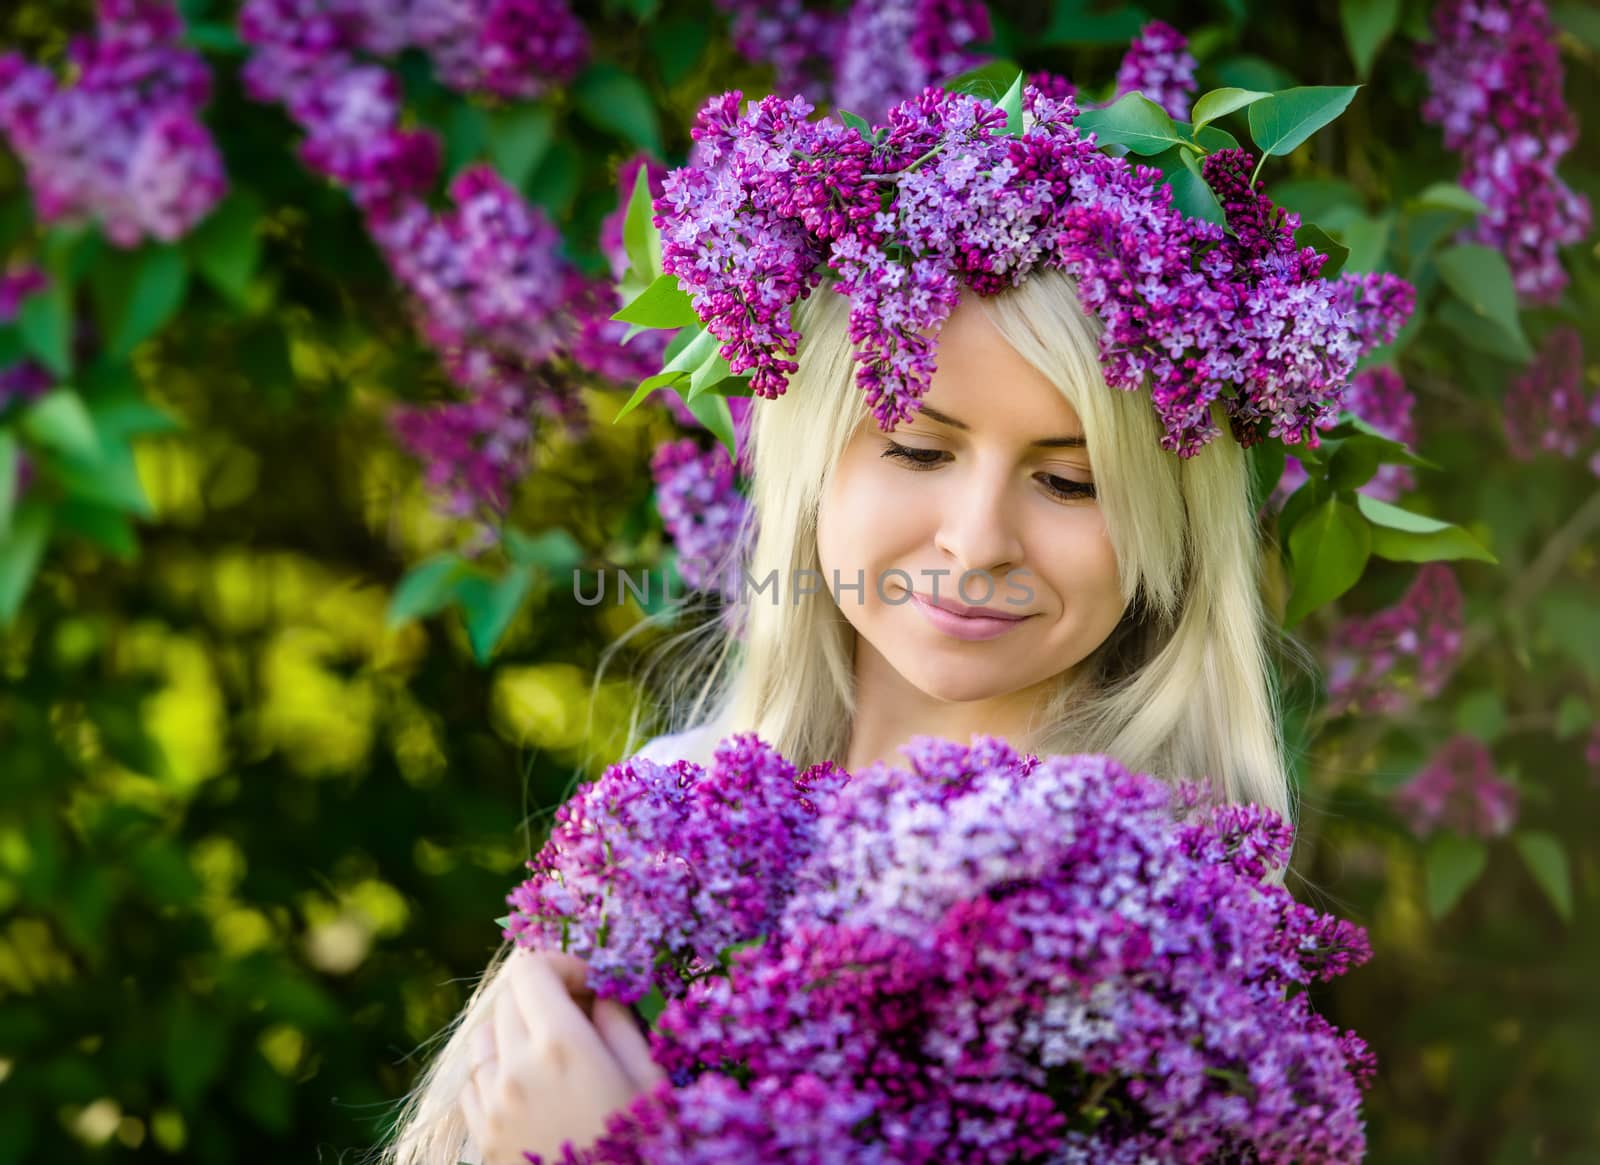 Beautiful smiling young blonde woman is wearing wreath and bouquet of lilac flowers. Outdoor portrait